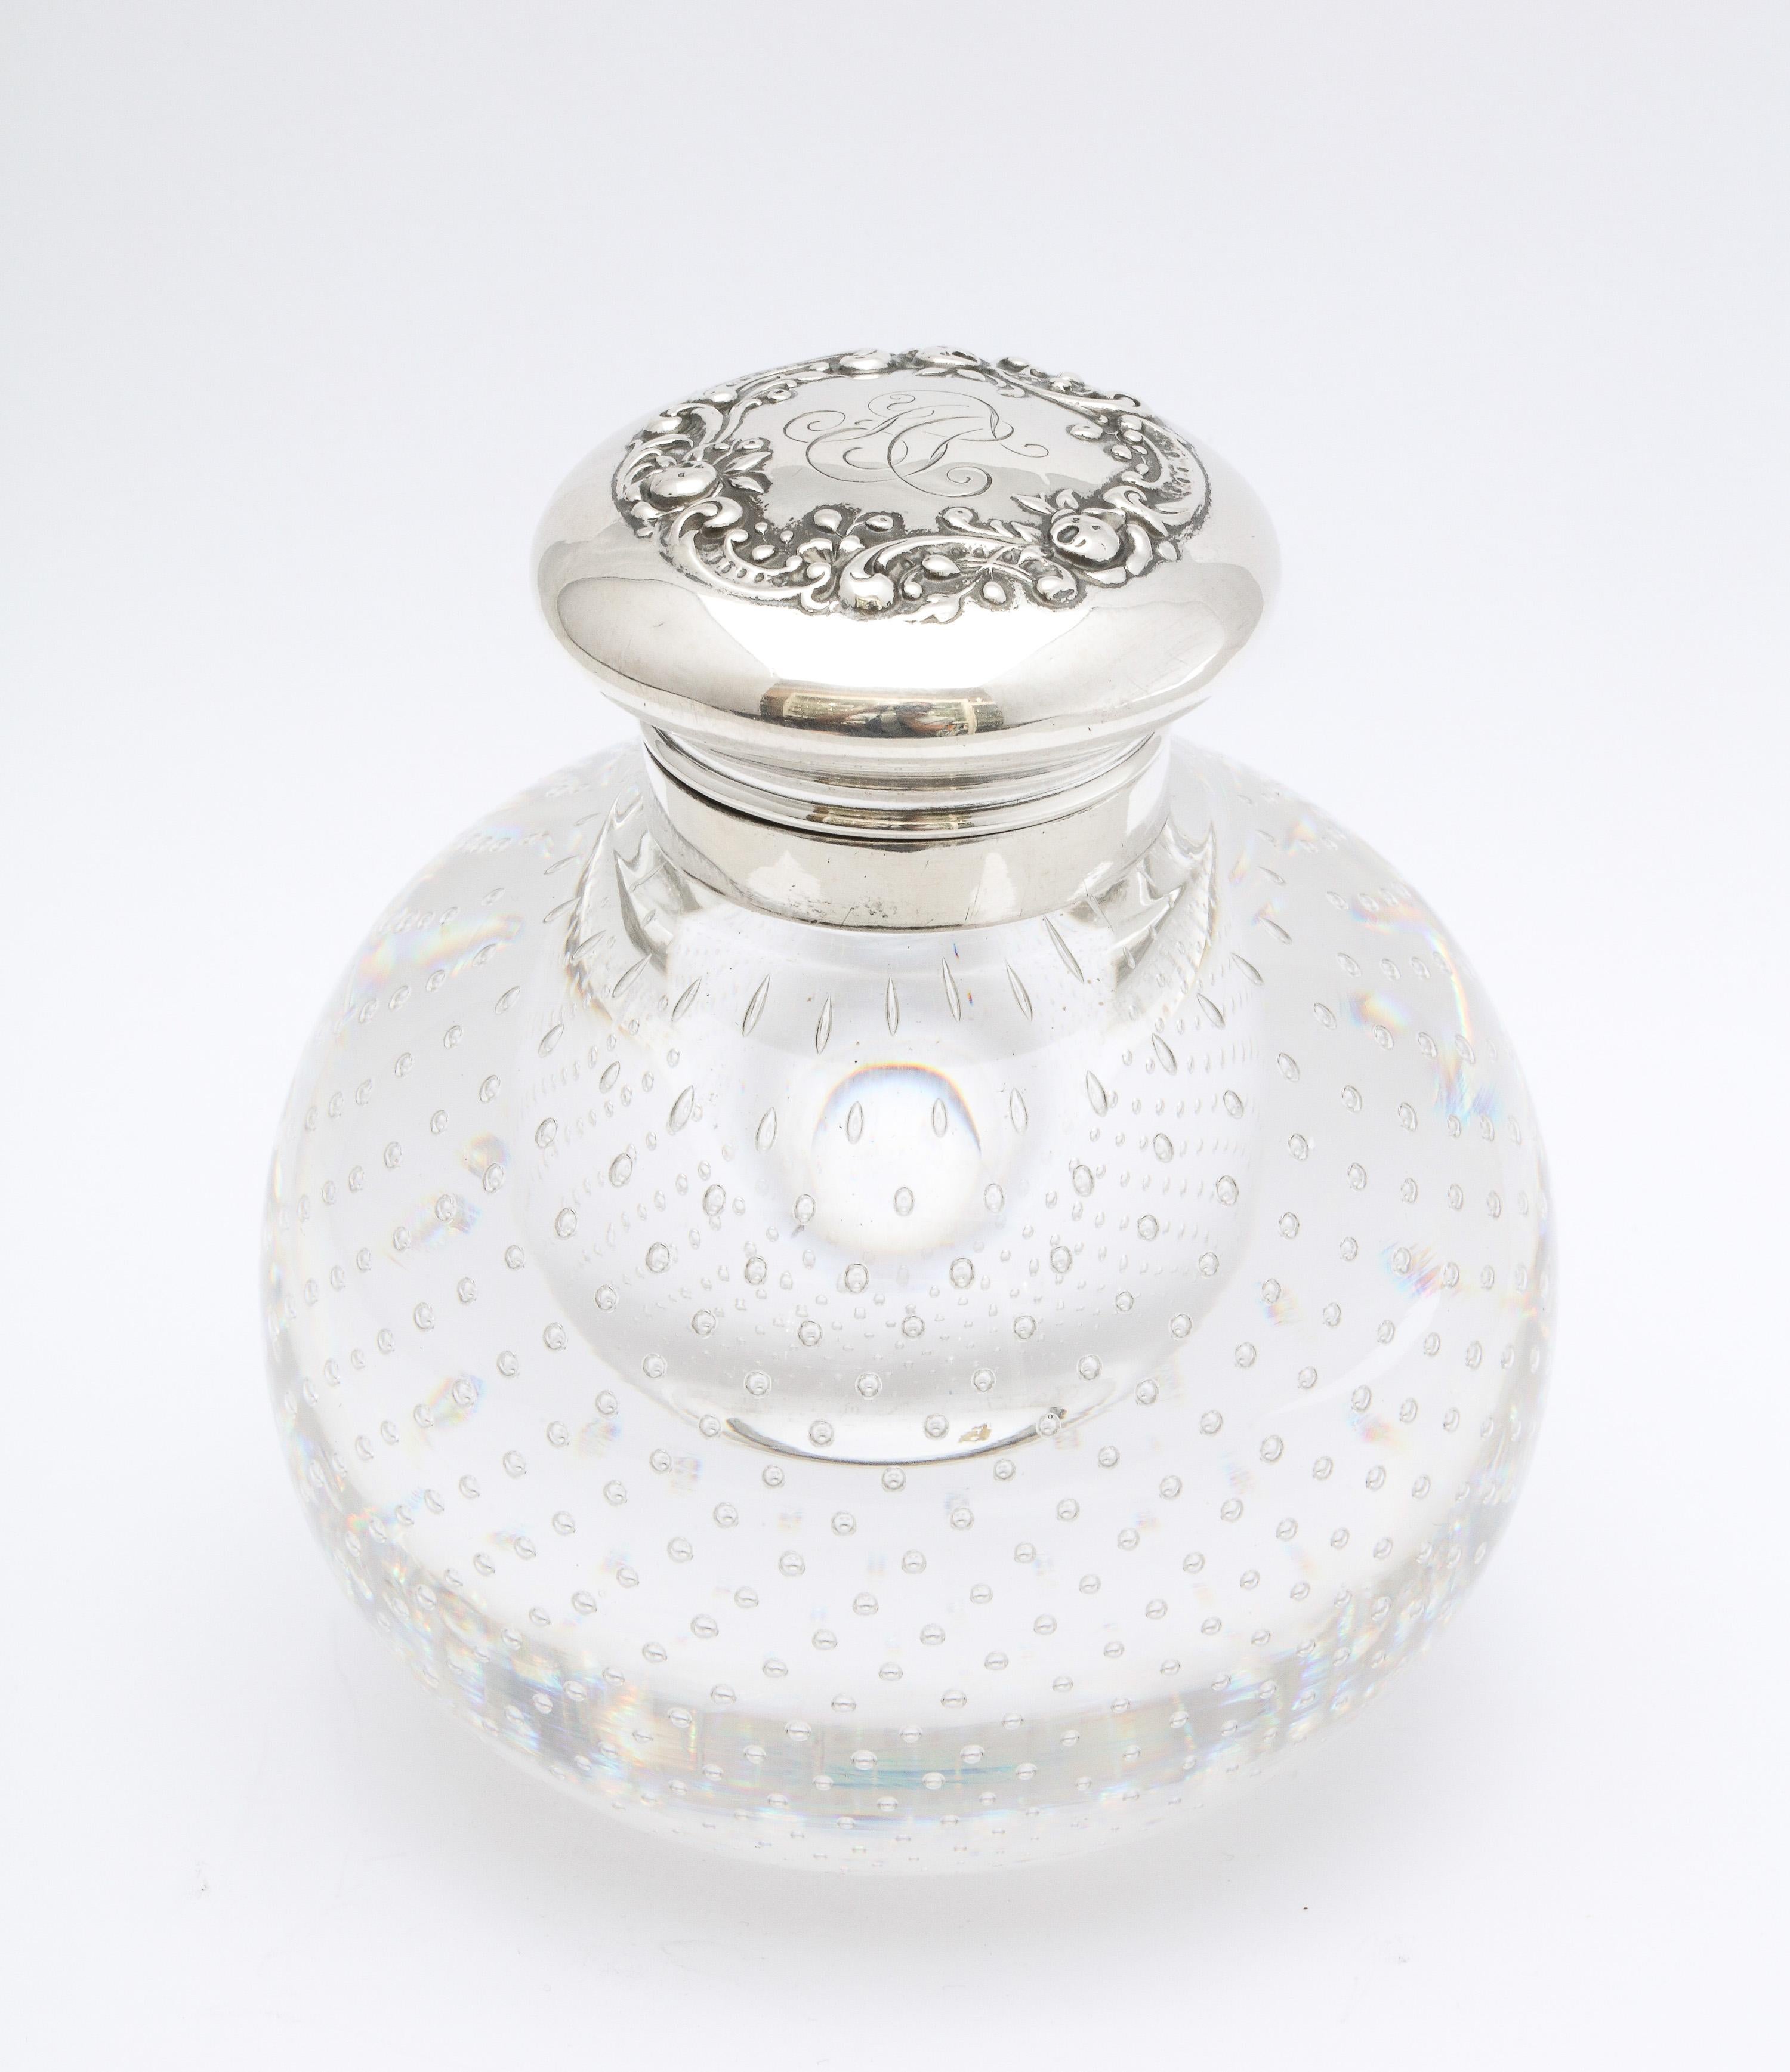 Victorian period, sterling silver-mounted controlled bubbles crystal inkwell with hinged lid, Gorham Mfg. Corp., Providence, Rhode Island, Ca. 1895. Interior of sterling silver hinged lid is lightly gilded; top of lid is decorated with flowers and